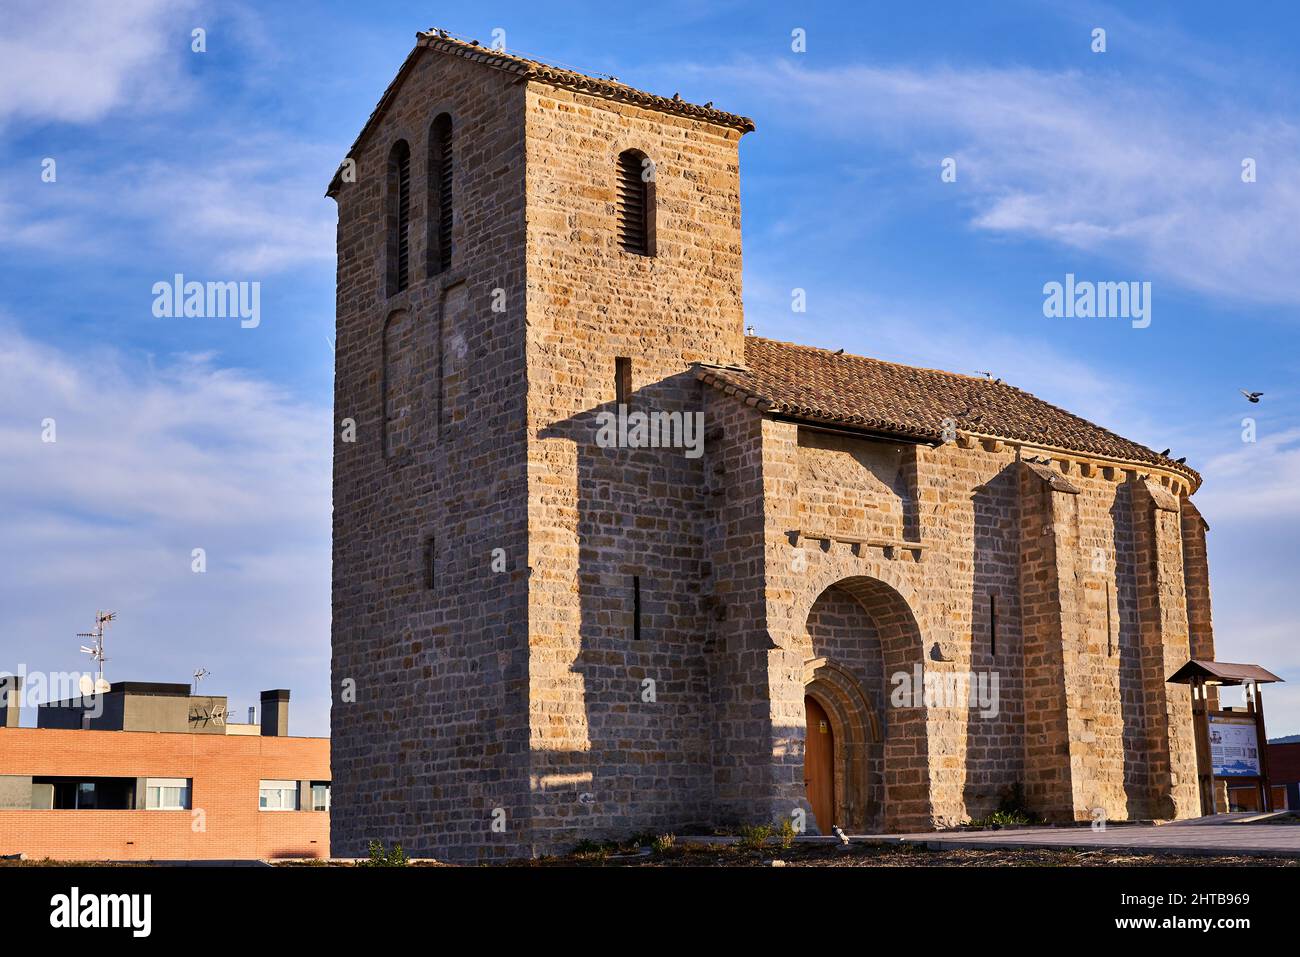 Views of the desecrated church built between the 13th and 14th centuries Stock Photo